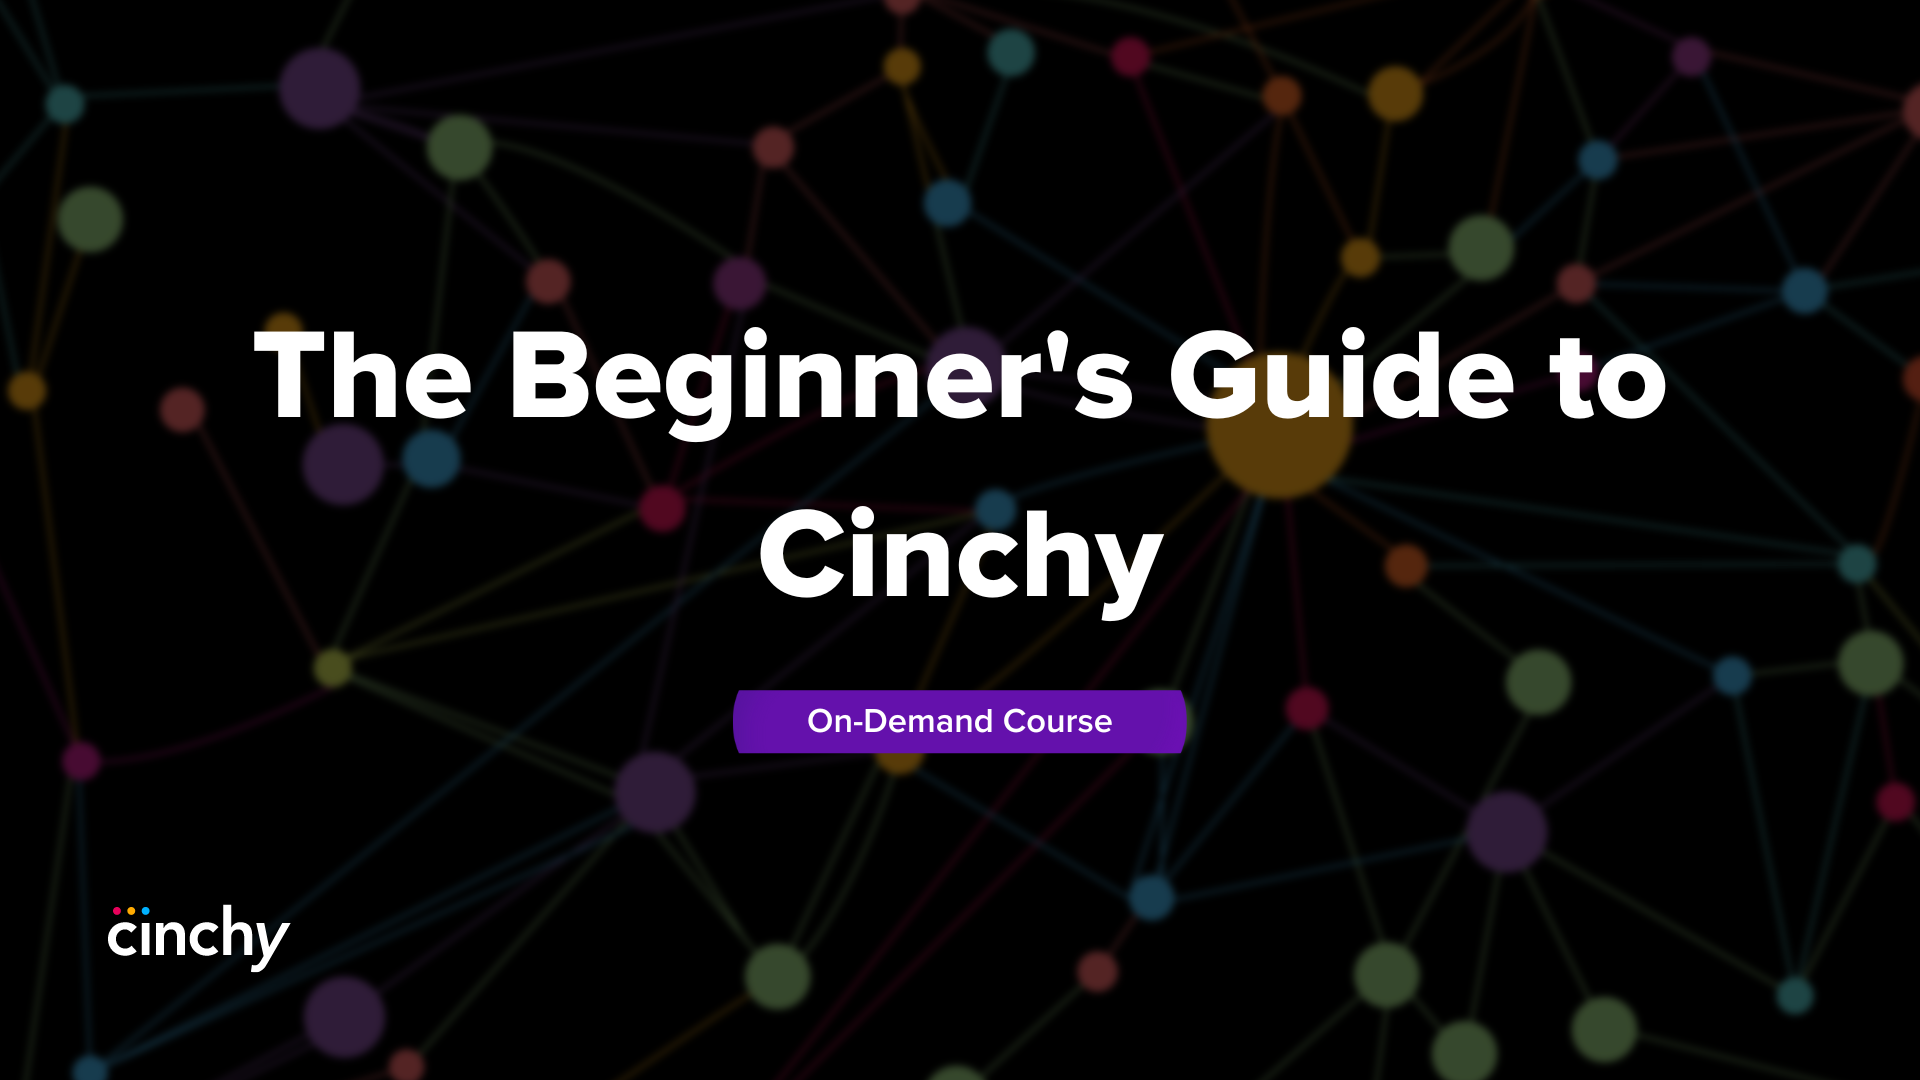 The Beginner’s Guide to Cinchy